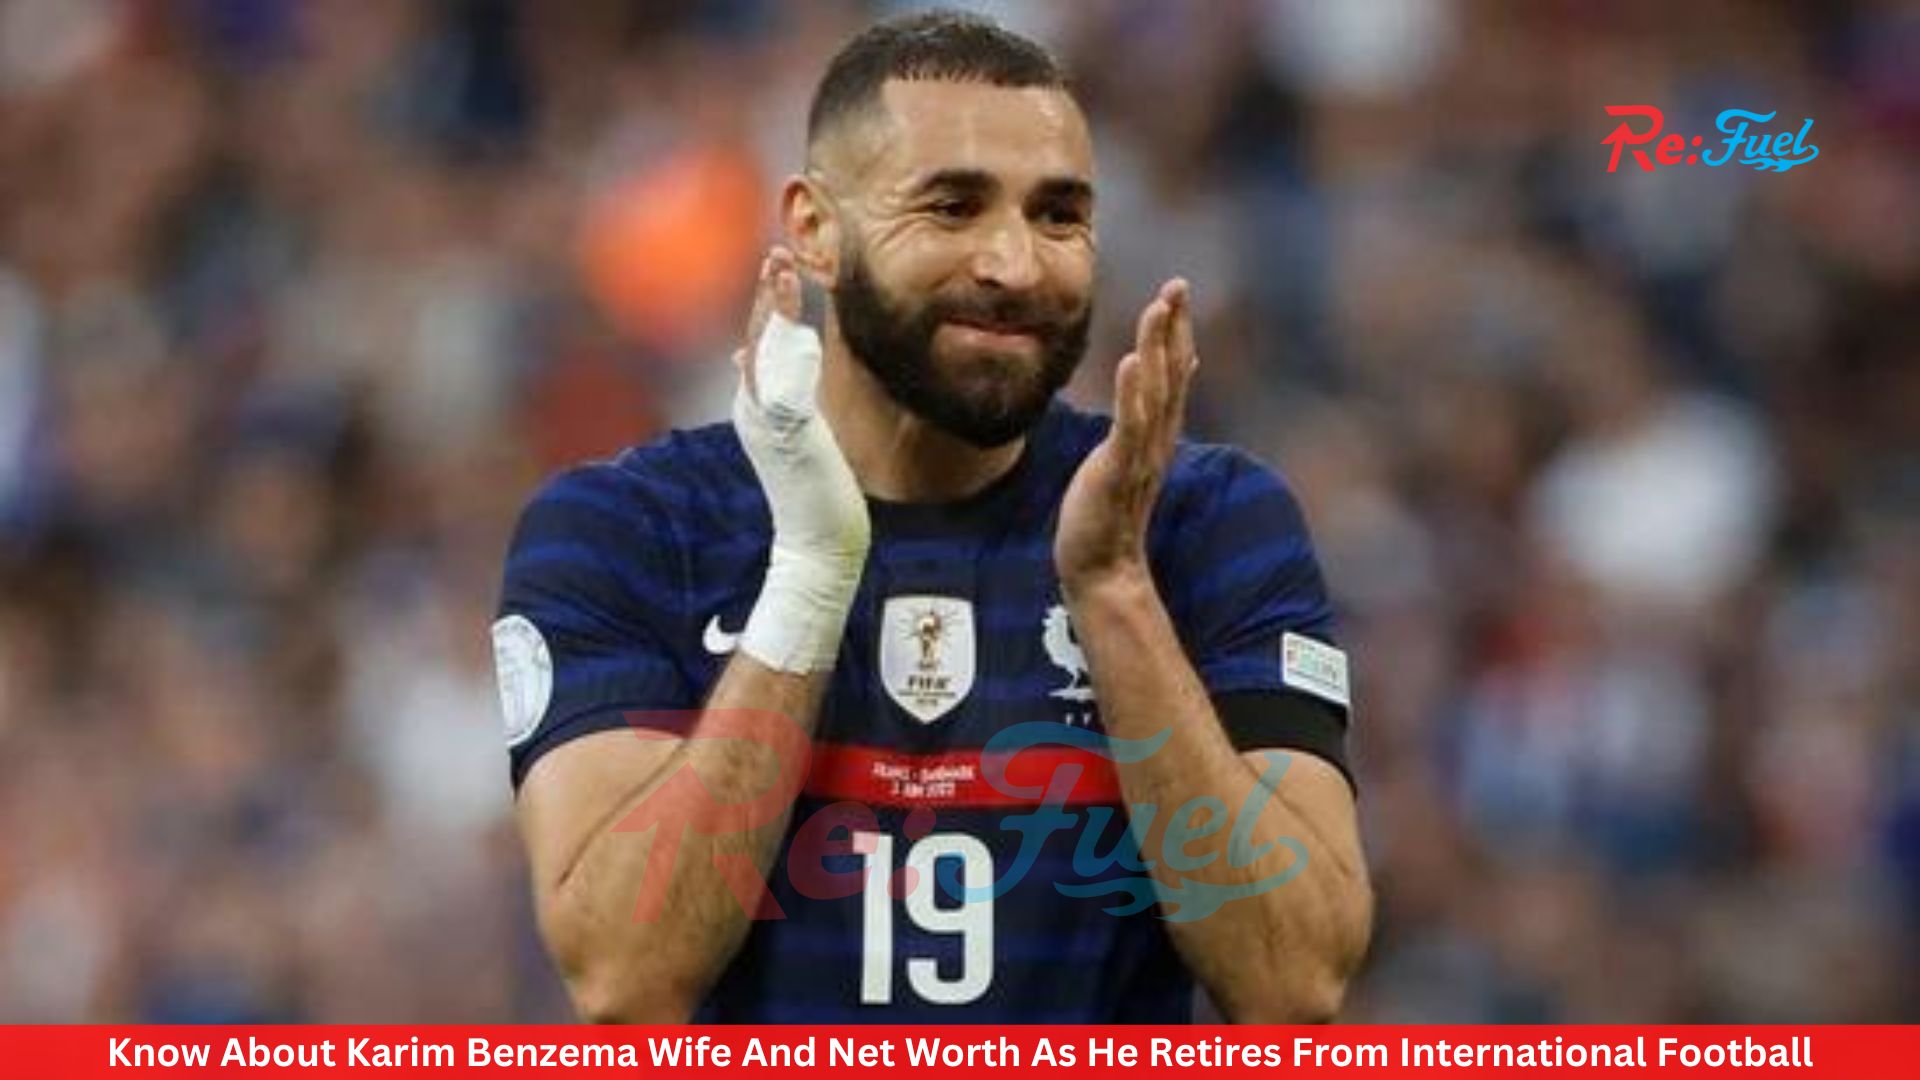 Know About Karim Benzema Wife And Net Worth As He Retires From International Football